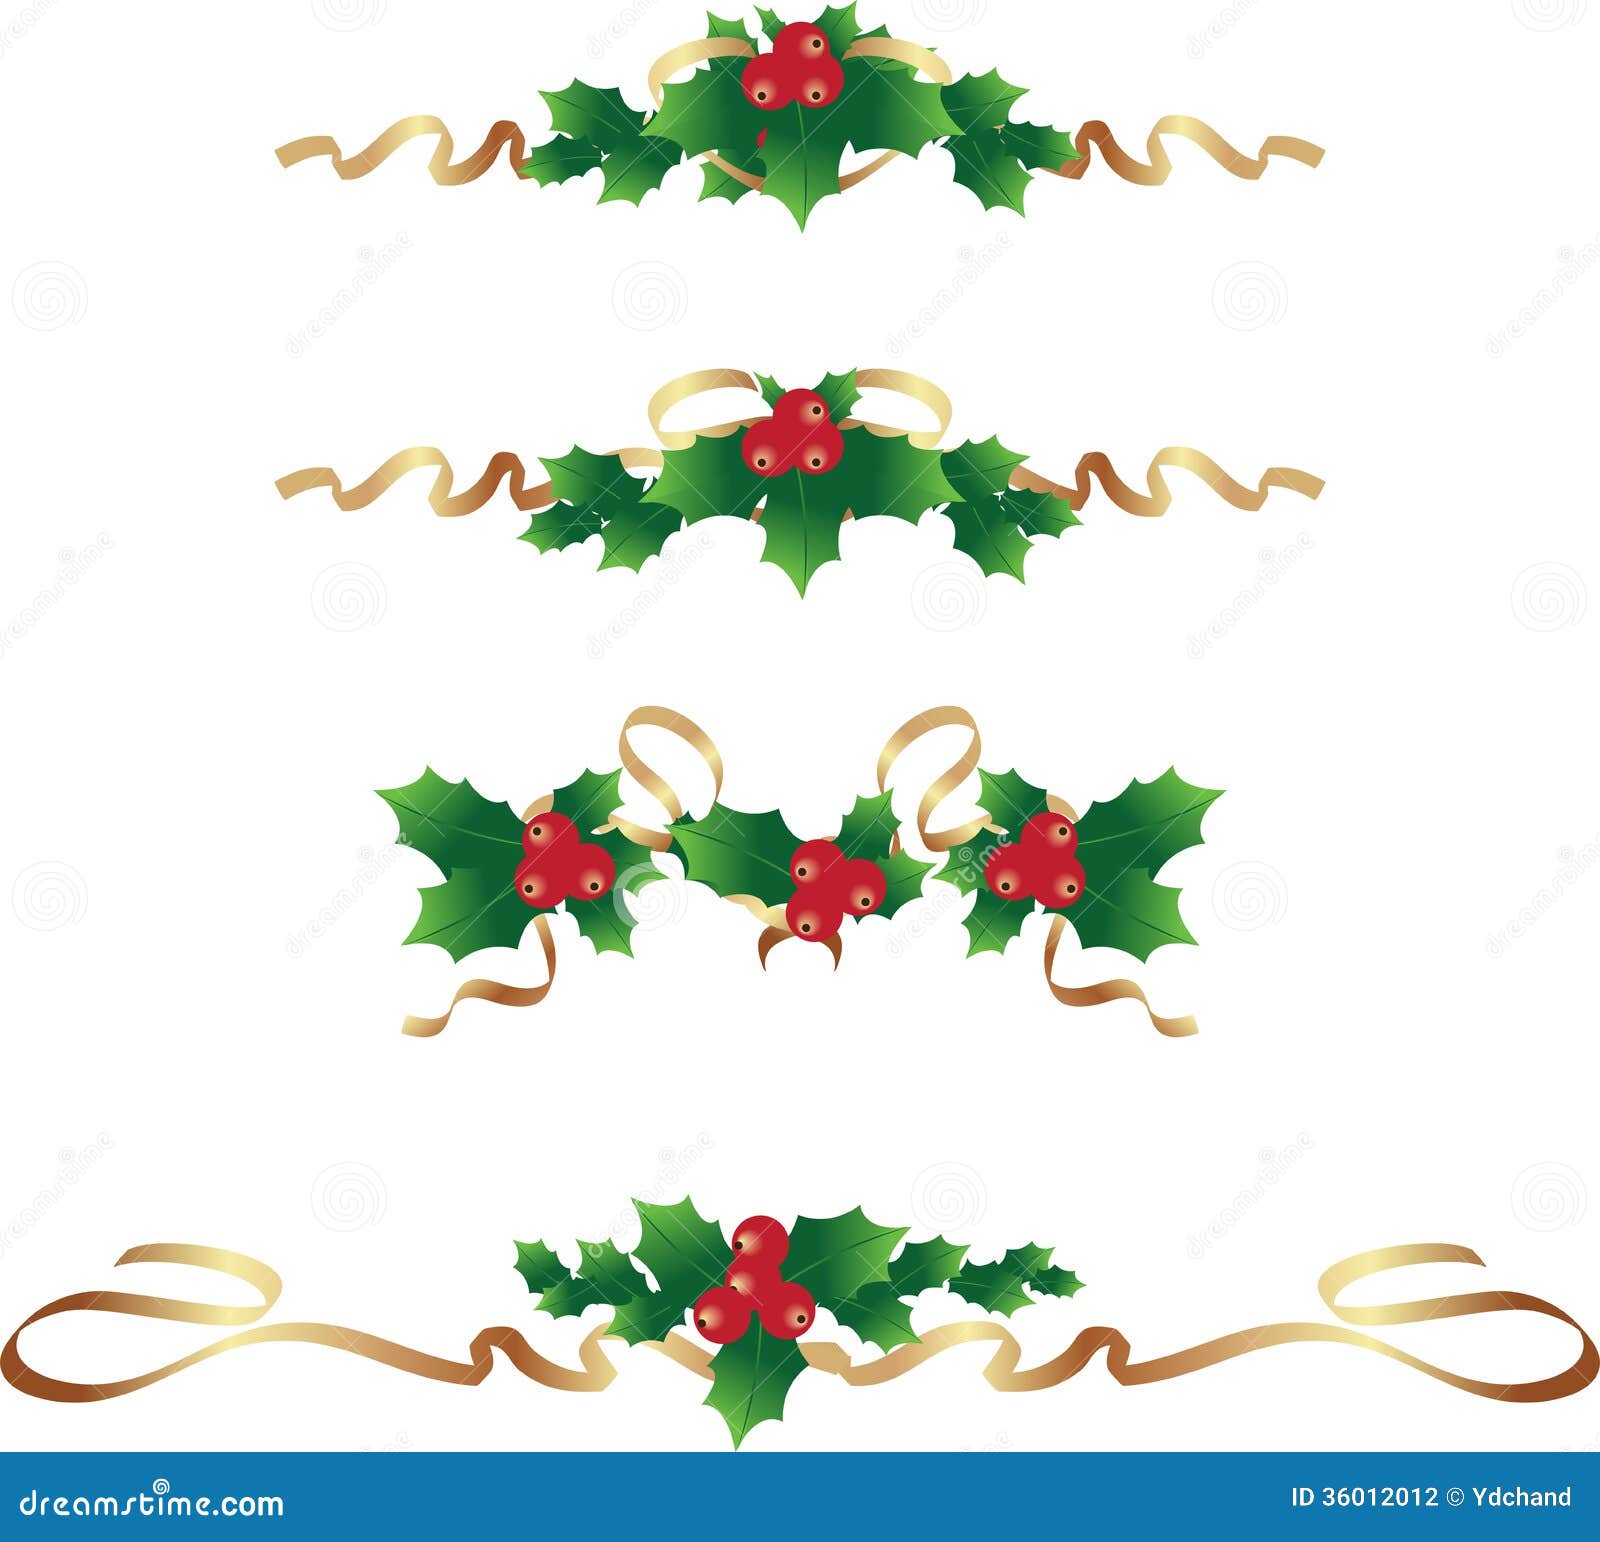 christmas clipart lines - photo #32